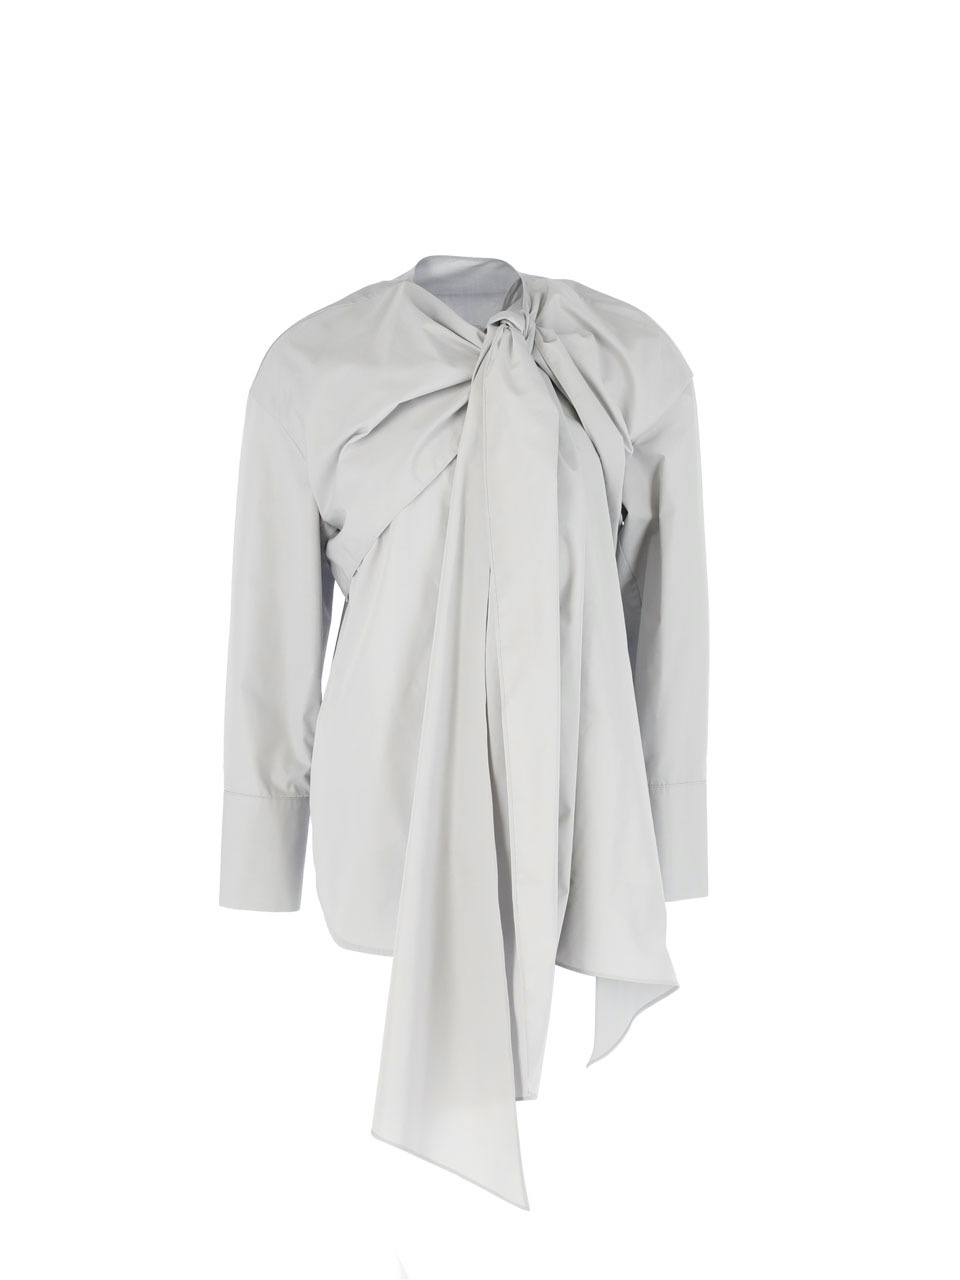 6A Ribbon-tie twisted layer shirt (Light Grey)